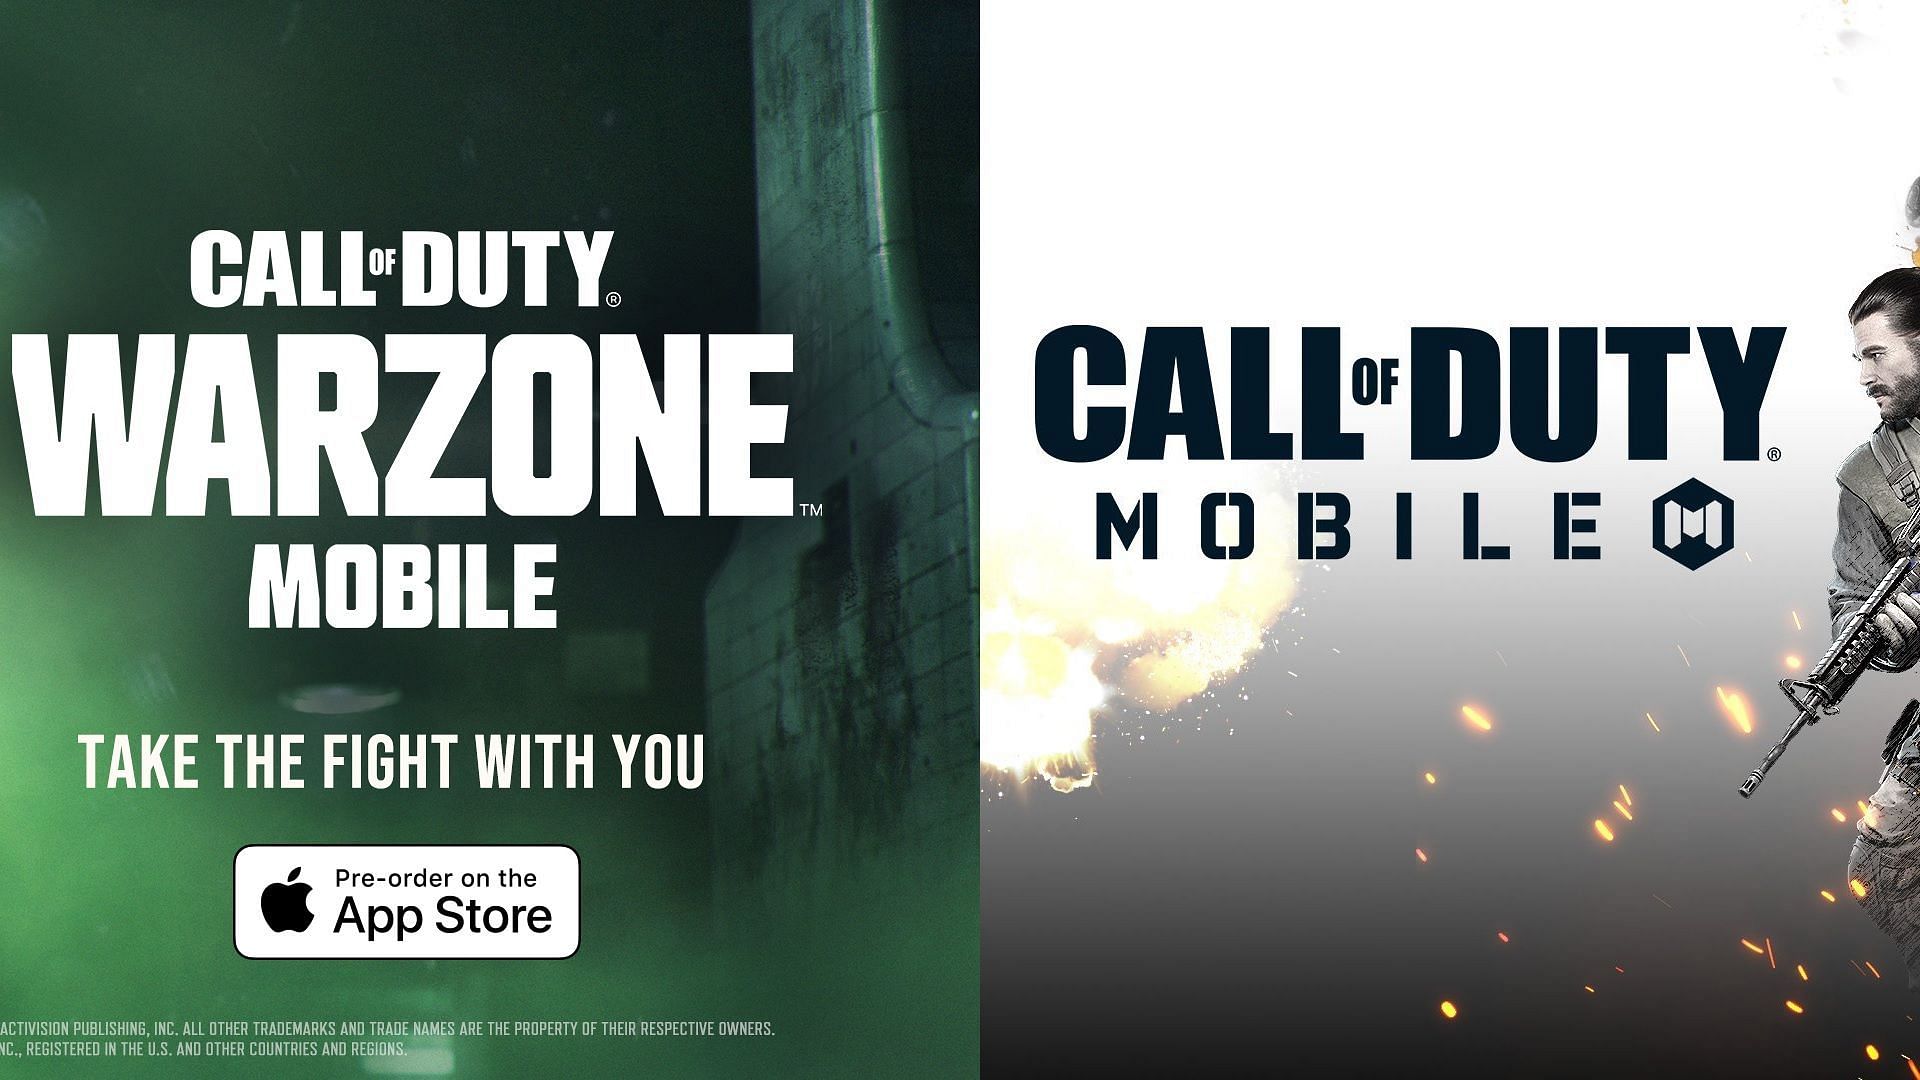 5 reasons why COD Mobile players will like Warzone Mobile